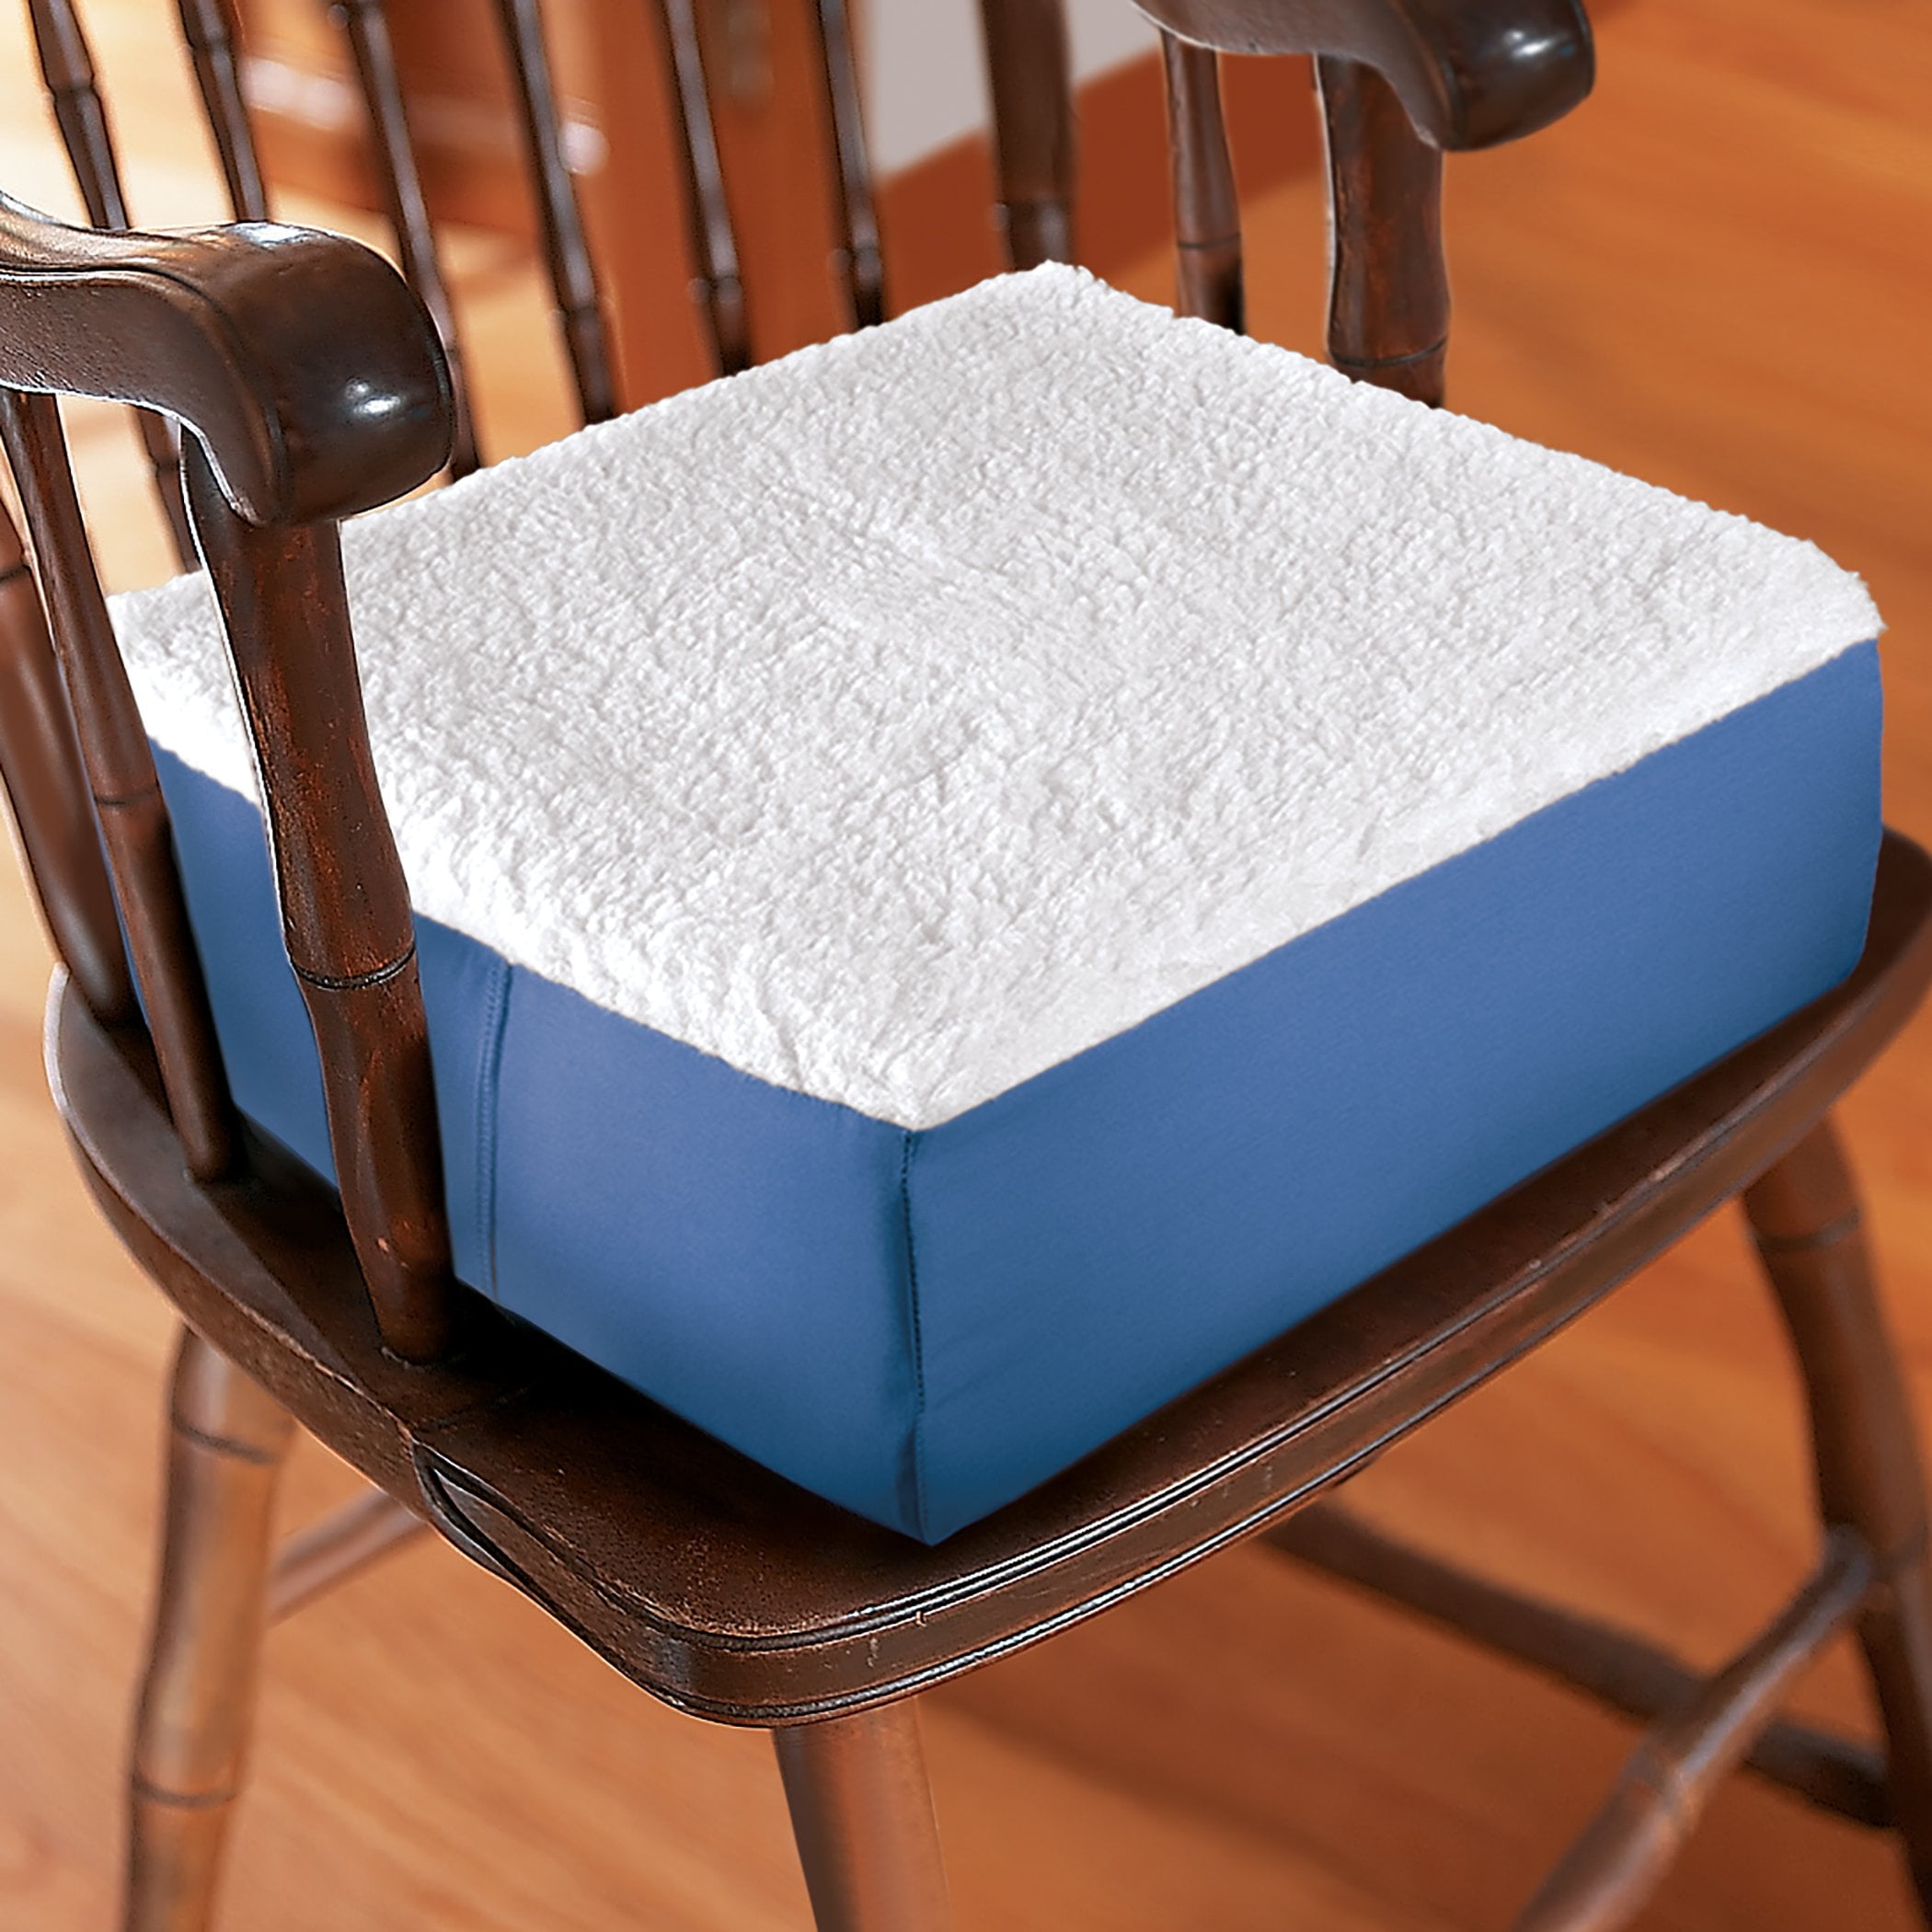 Extra Thick Foam Chair Cushion – Large Portable Chair Pad with Removable  and Washable Beige Slip-on Cover – 5 Inches Thick for Added Pain and  Pressure